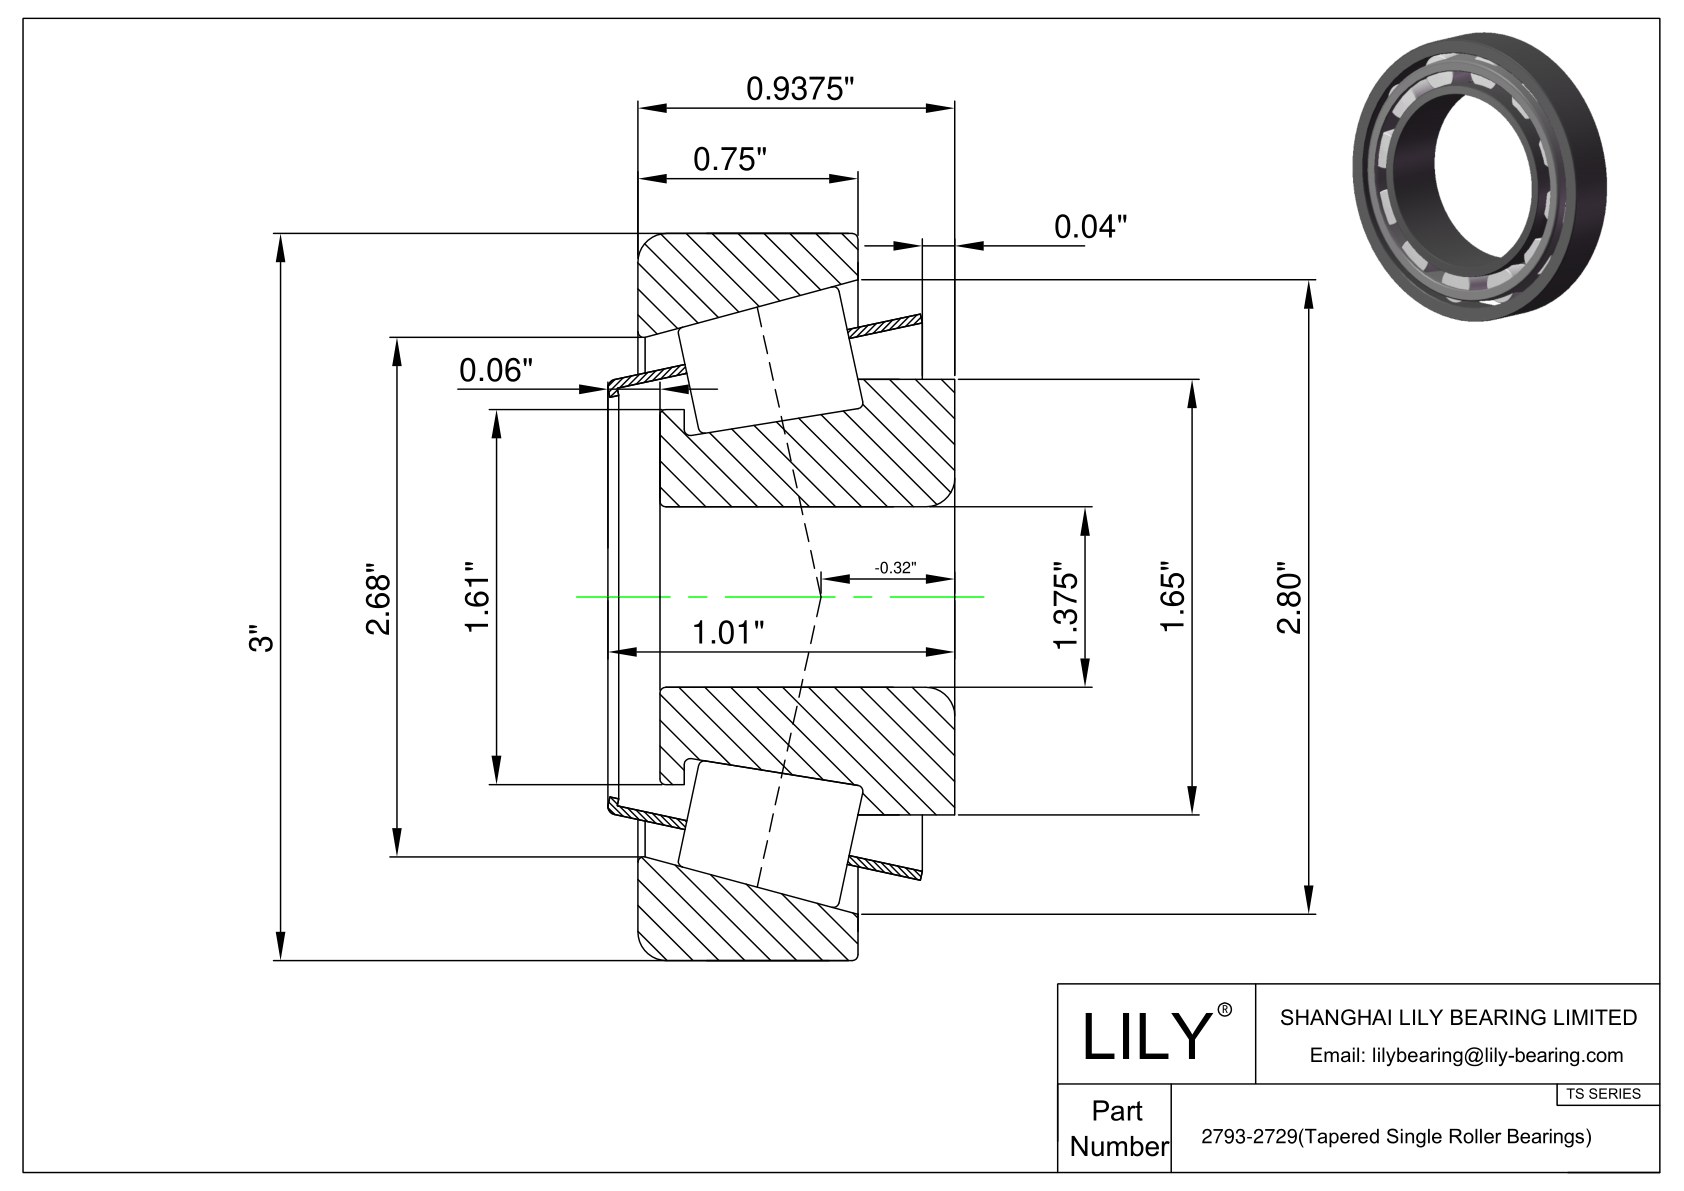 2793-2729 TS (Tapered Single Roller Bearings) (Imperial) cad drawing